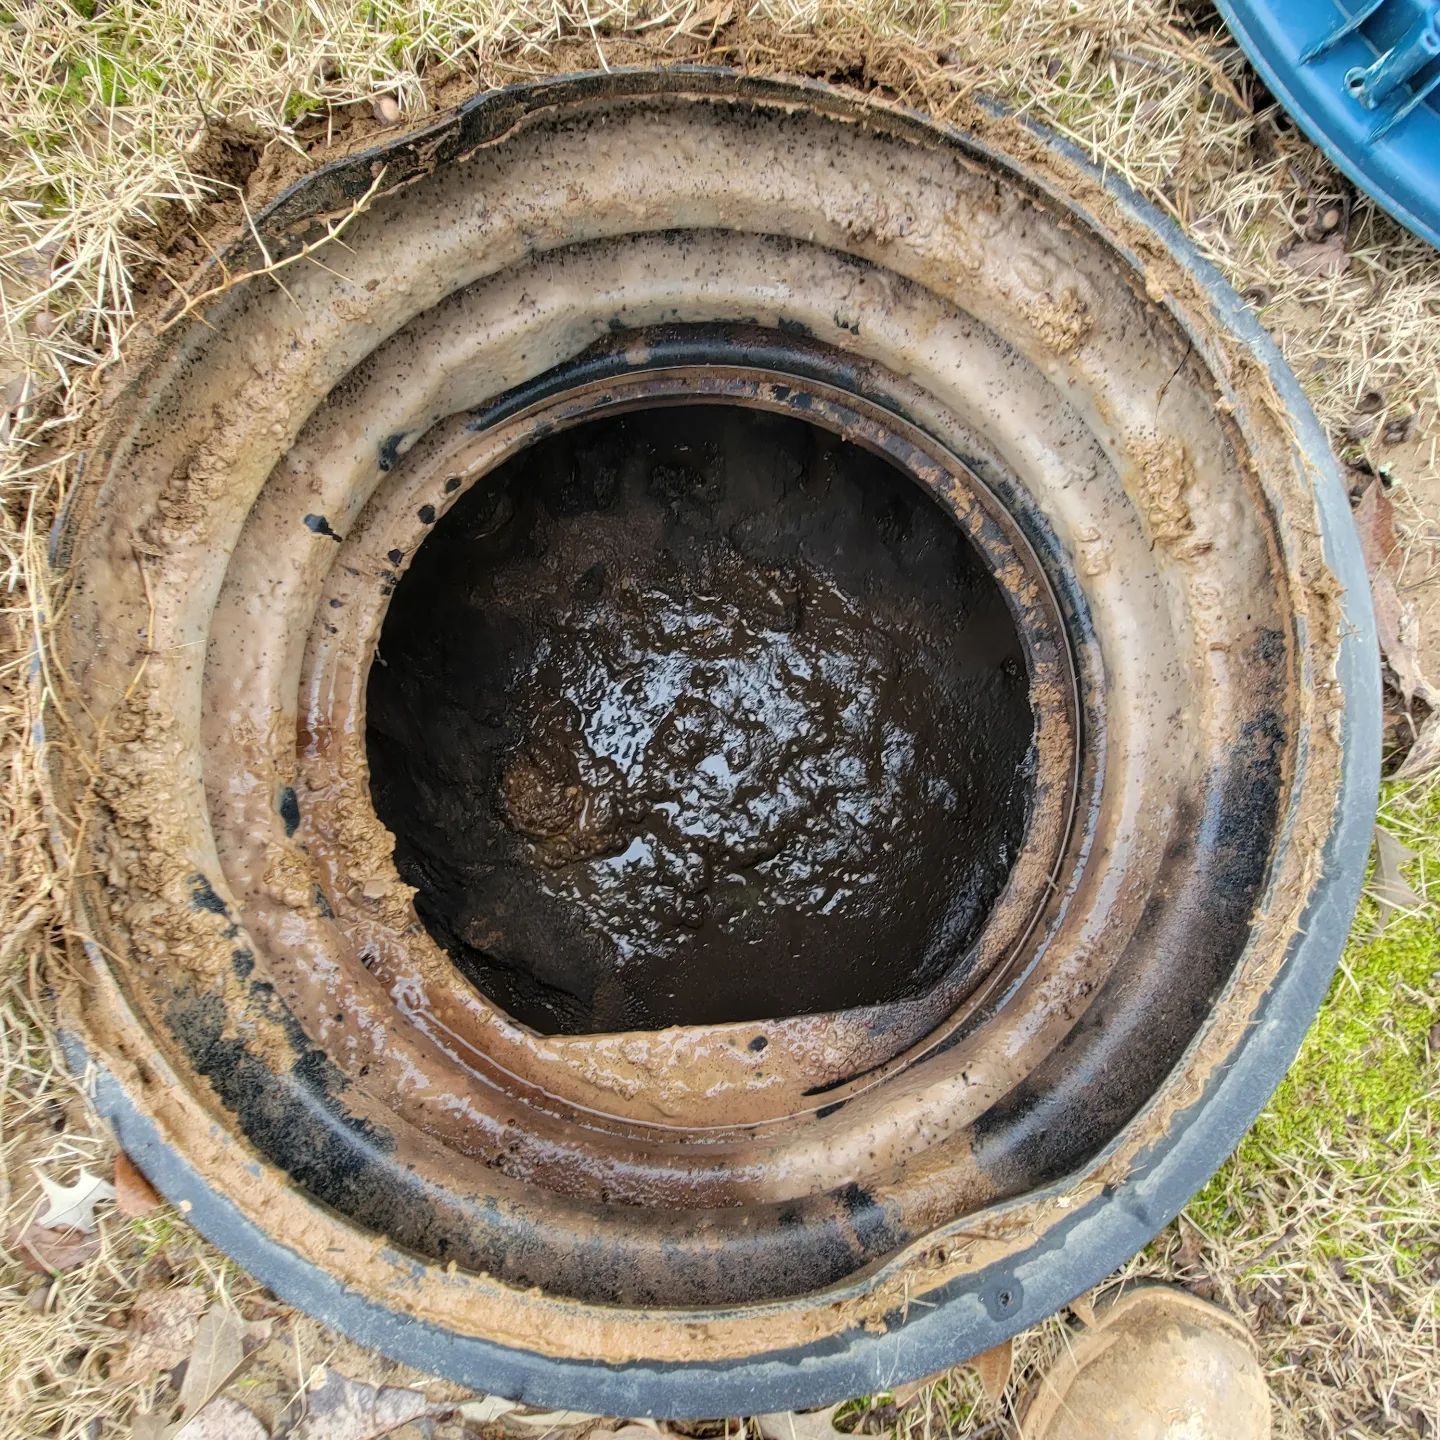 Commercial Septic System Service
